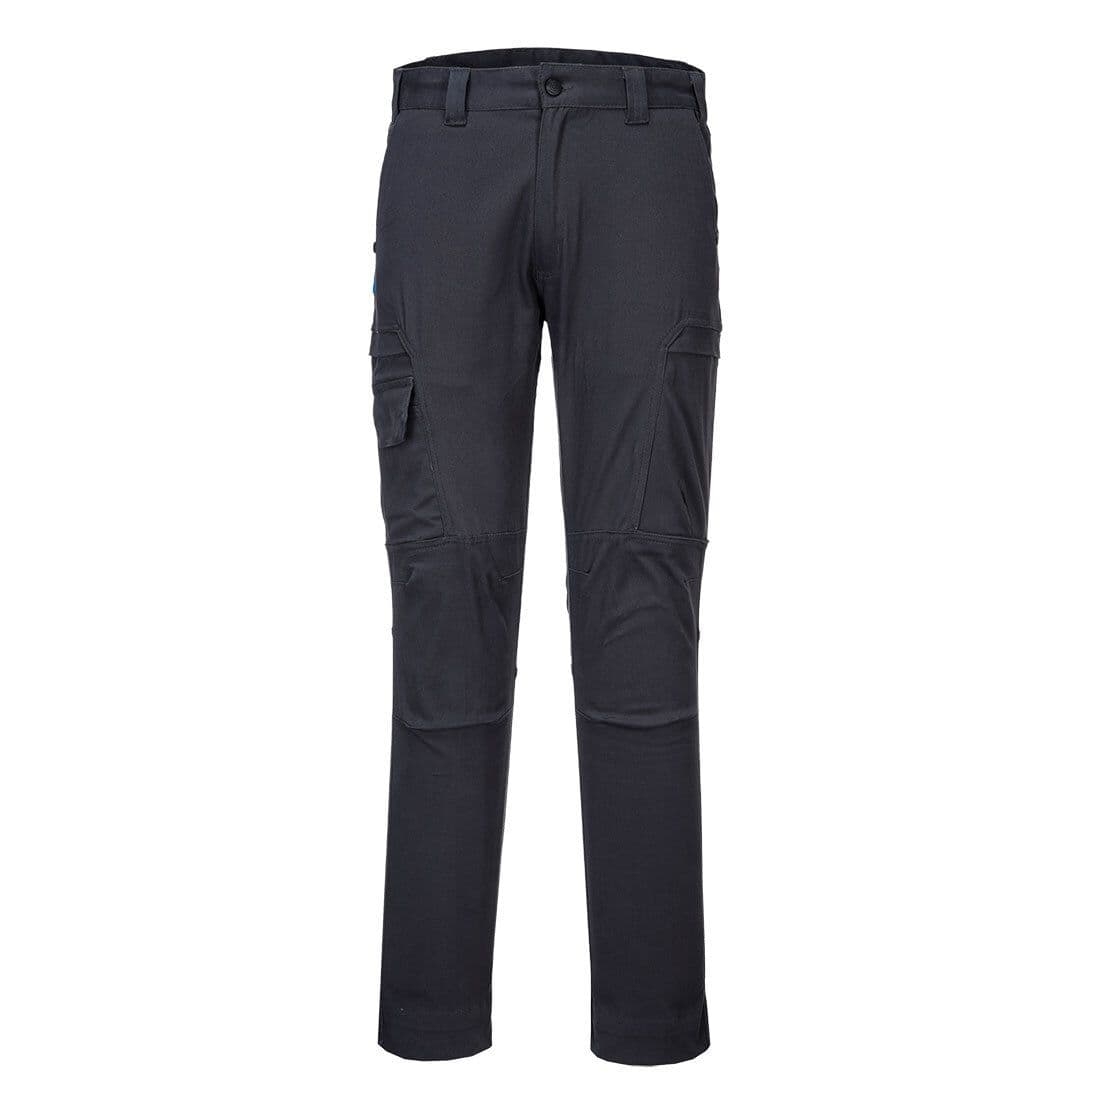 Portwest KX3 Cargo Trouser – Metal Grey – 28 – Durable – PPE – Taft Safety Store